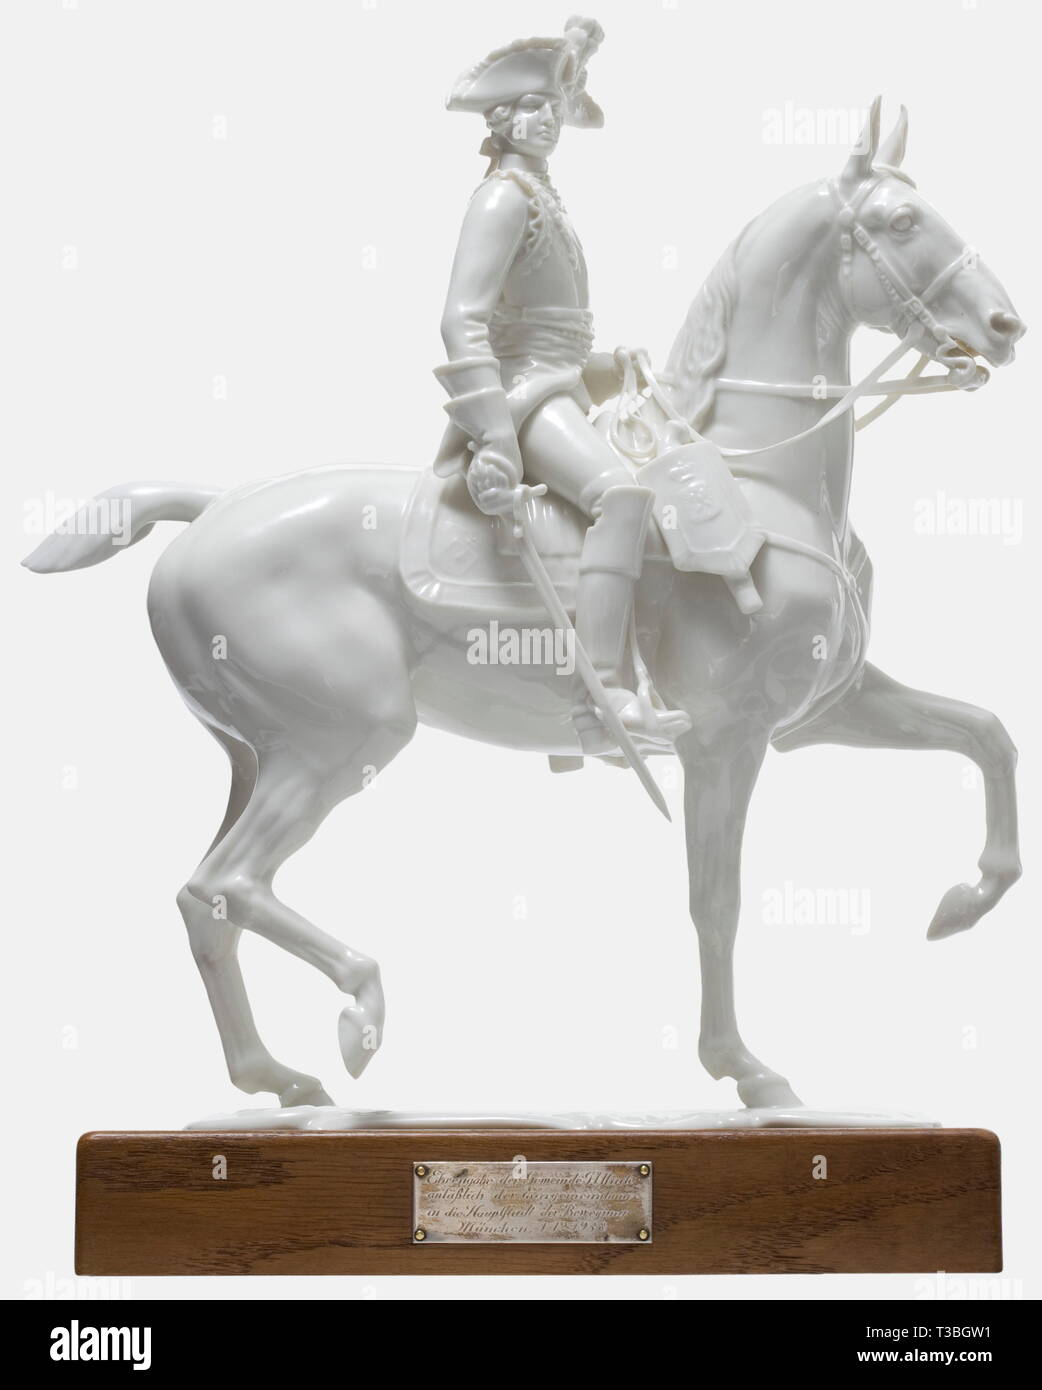 A Seydlitz-Cuirassier Officer with dedication of the Allach municipality 1938, Allach Porcelain Factory Design by Prof. Theodor Kärner. Model number '17'. White, glazed porcelain figure of a Prussian 18th century cuirassier. On the bottom the artist's signature, model number and manufacturer's pressmark 'SS Allach' in underglaze green and in an octagon. The tail and the reins of the horse restored. Height 31.5 cm. On a dedication base made from oak wood with customised sinking for the porcelain plinth of the figure on top and a pinned, silver dedication plaque 'Ehrengabe de, Editorial-Use-Only Stock Photo